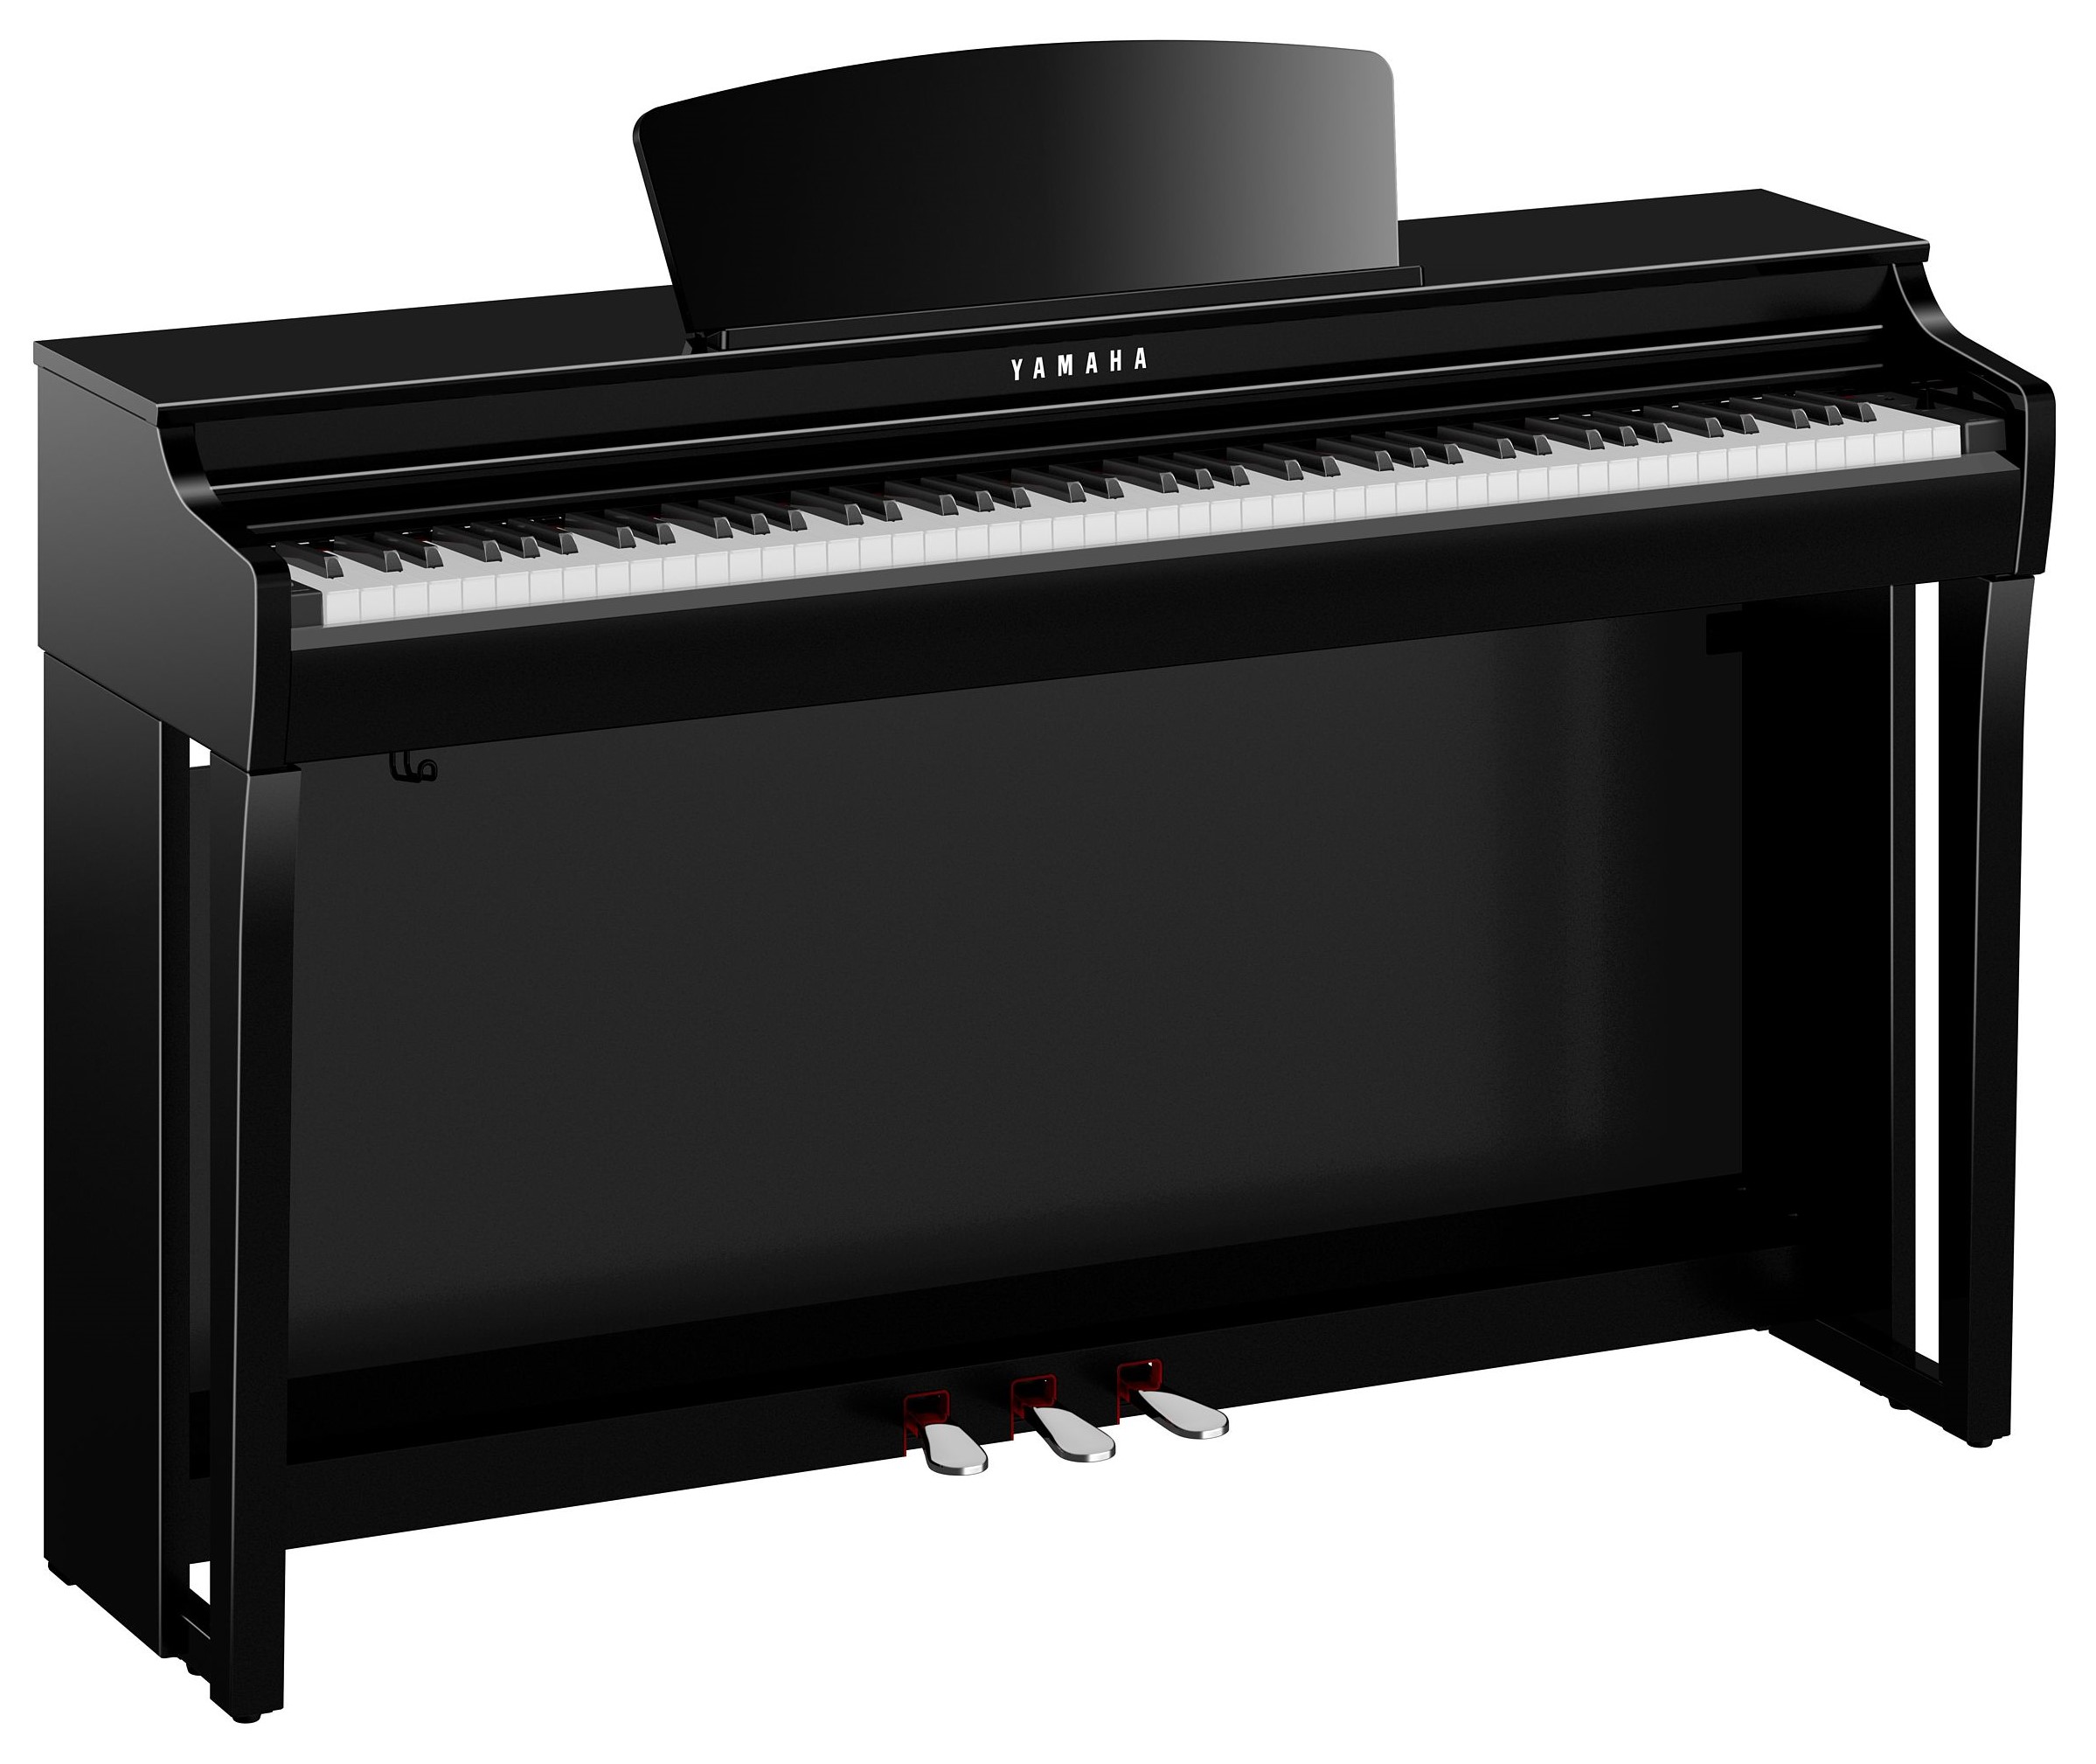 Yamaha Clp 725 Pe - Digital piano with stand - Variation 1